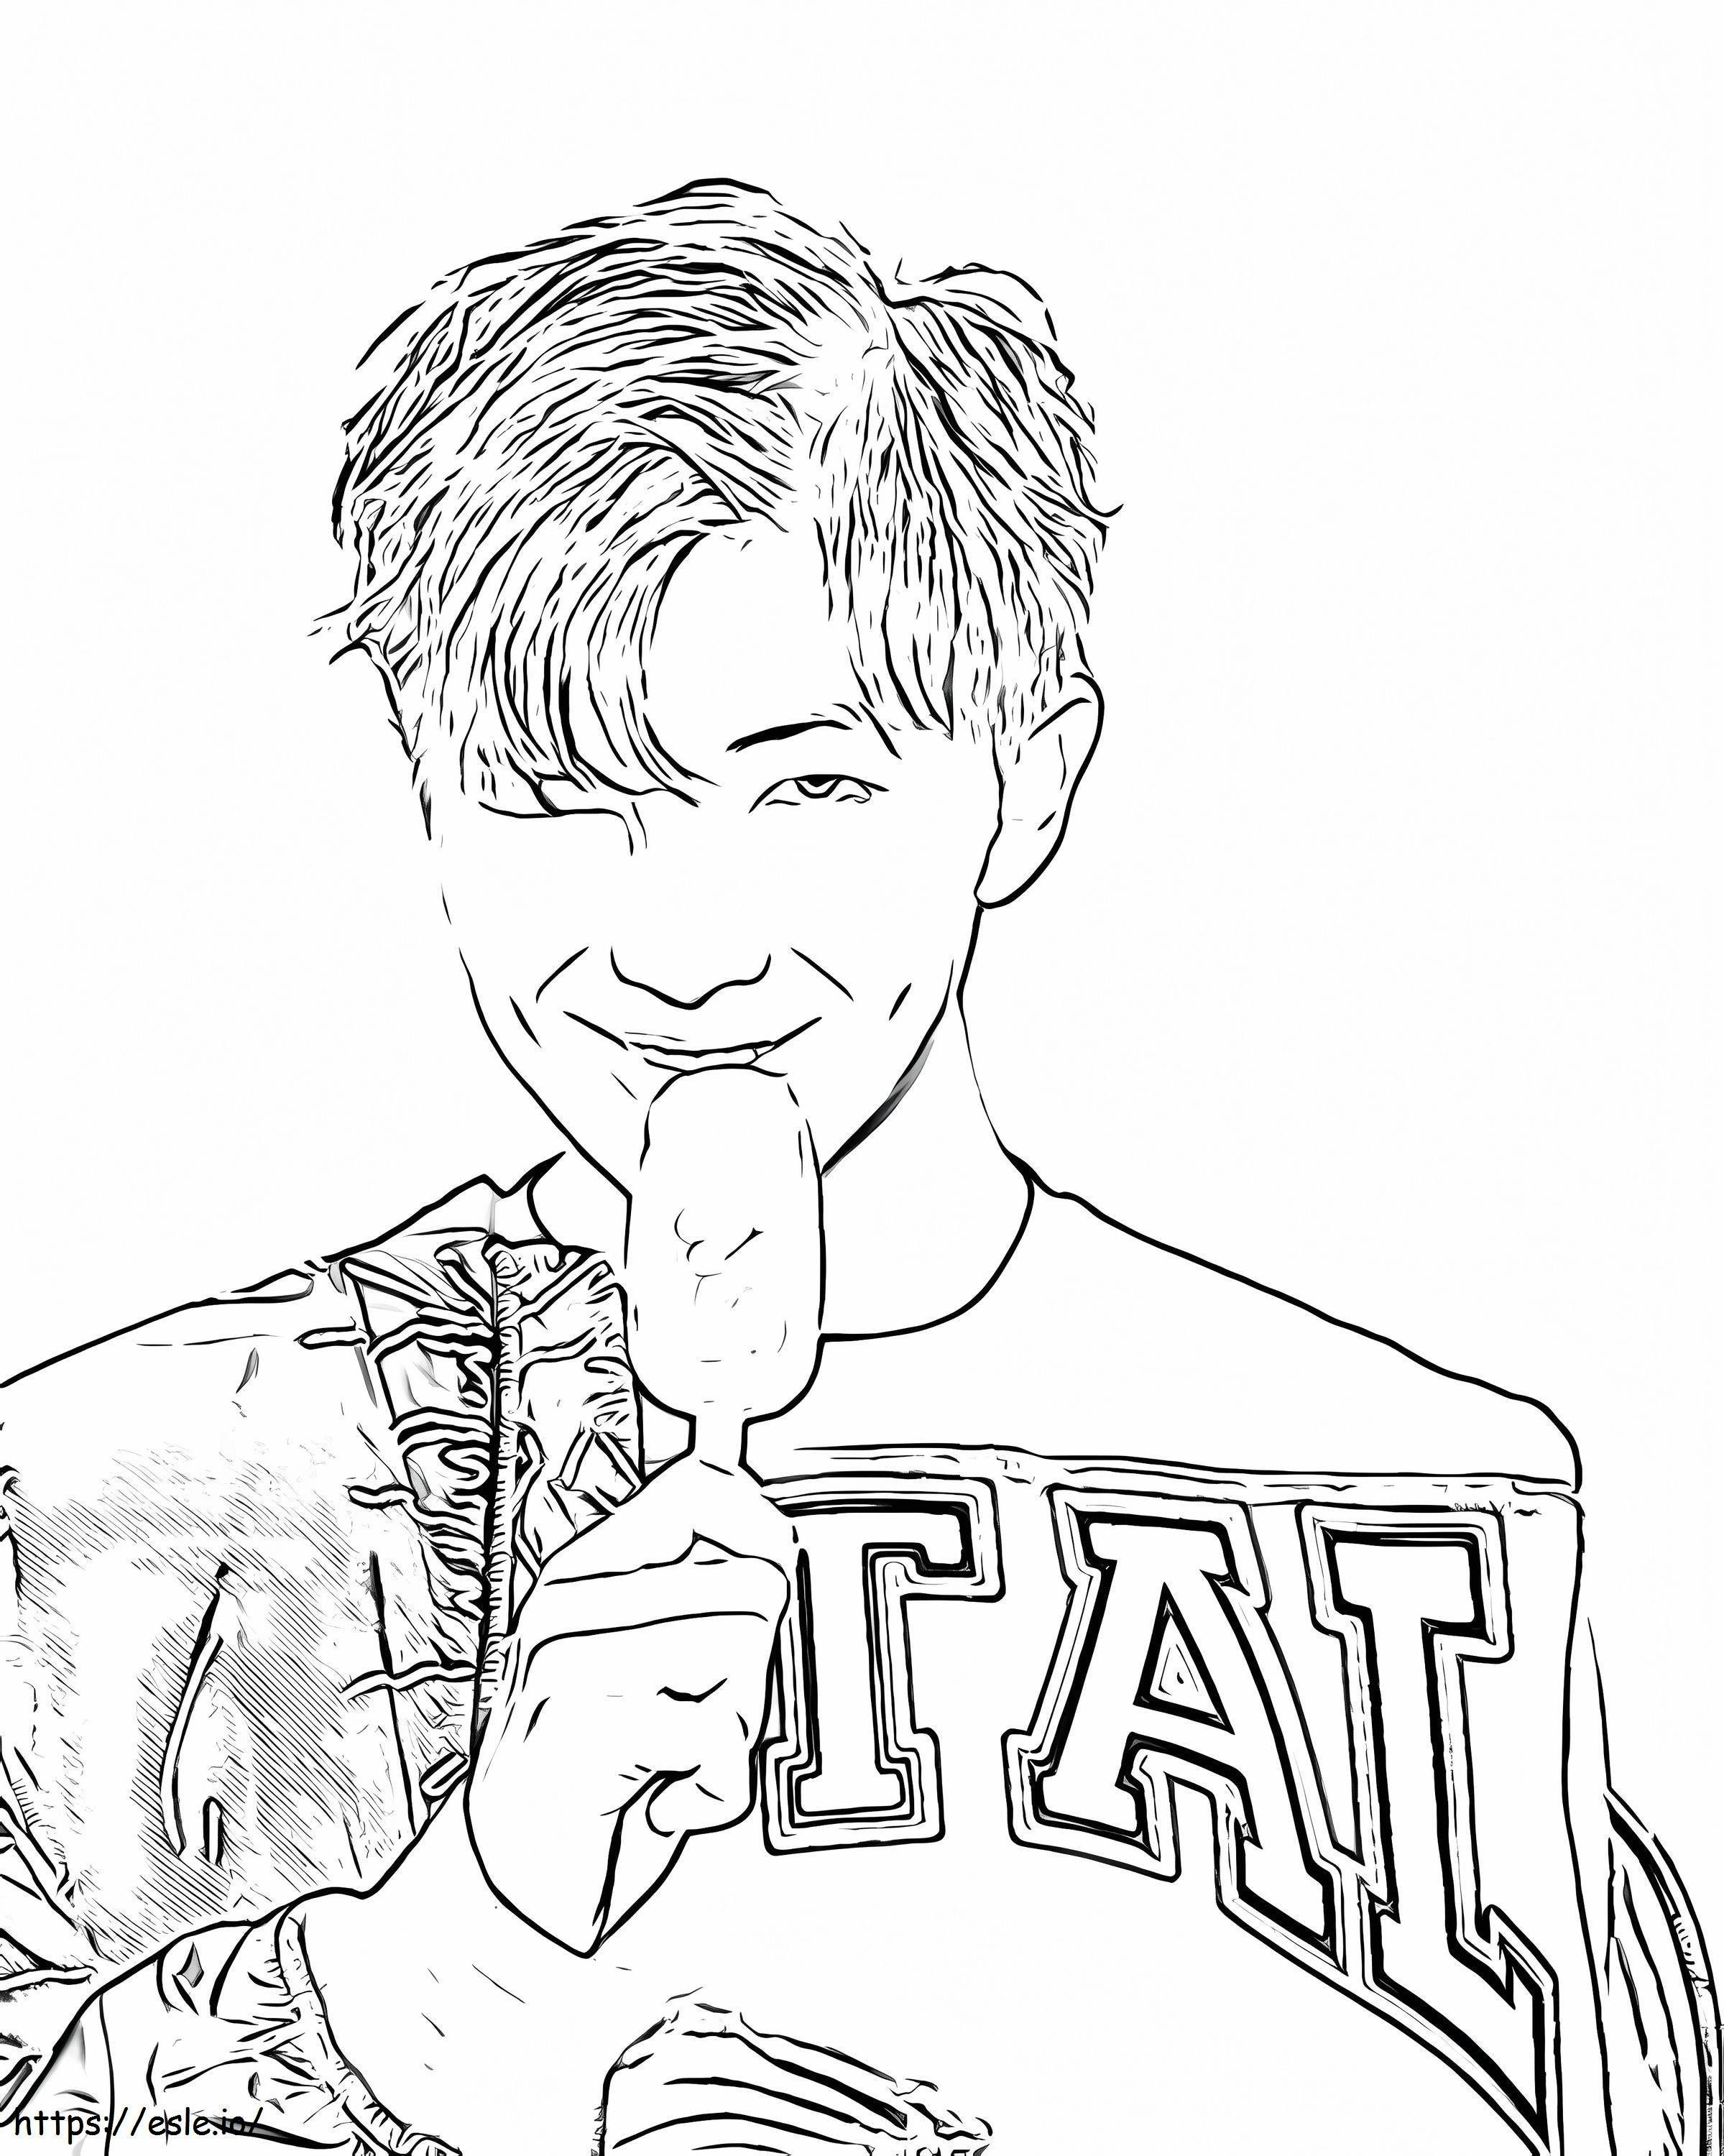 Rap Bts The Beast coloring page